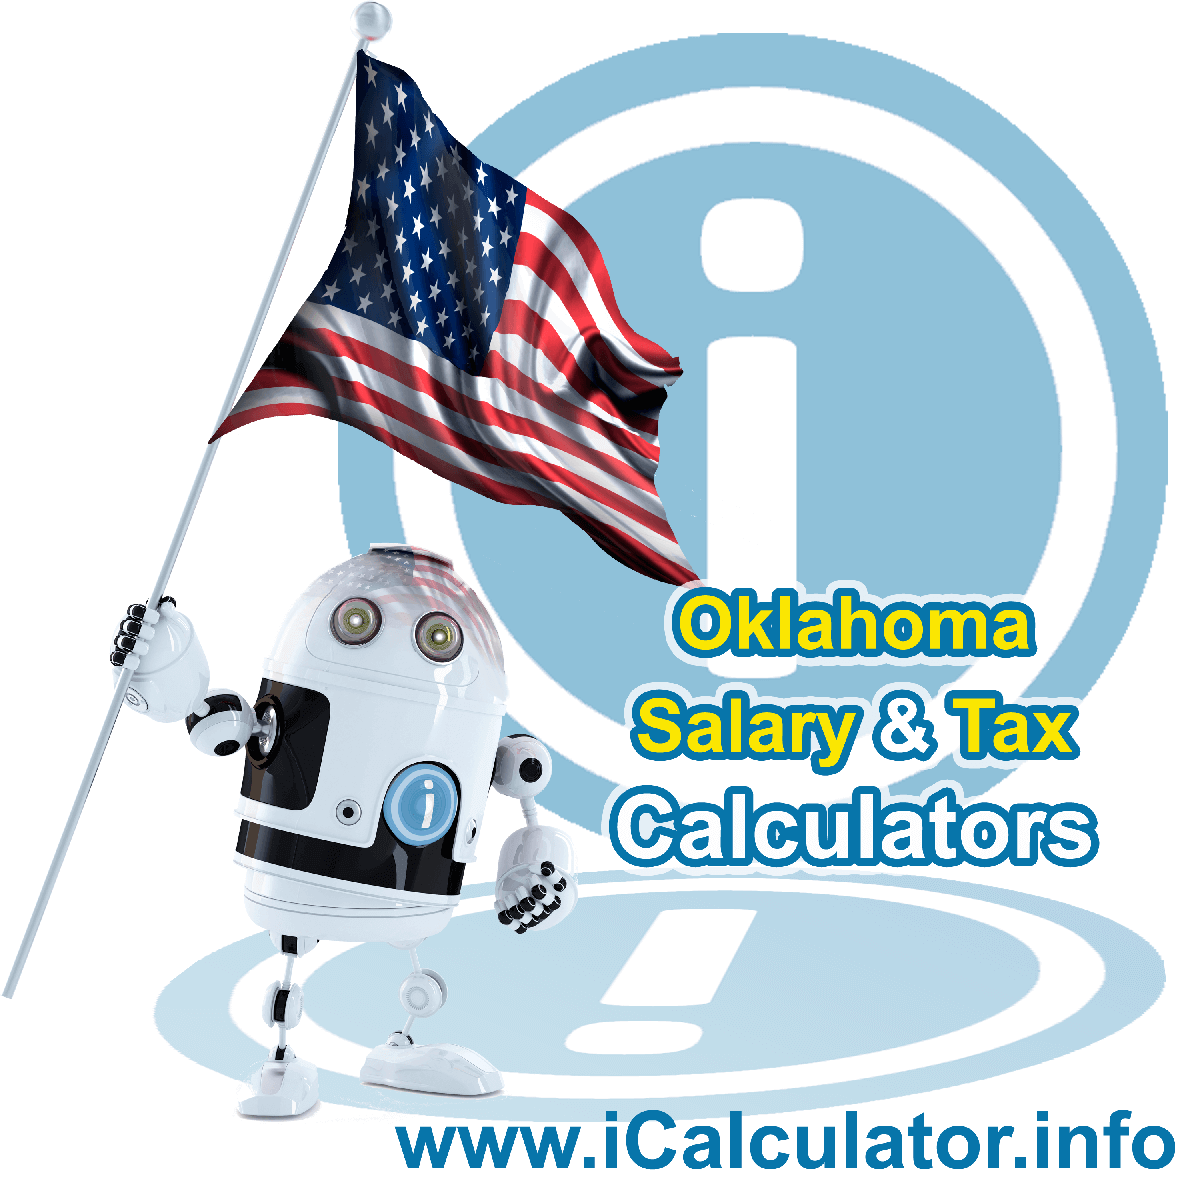 Oklahoma Salary Calculator 2023 | iCalculator™ | The Oklahoma Salary Calculator allows you to quickly calculate your salary after tax including Oklahoma State Tax, Federal State Tax, Medicare Deductions, Social Security, Capital Gains and other income tax and salary deductions complete with supporting Oklahoma state tax tables 